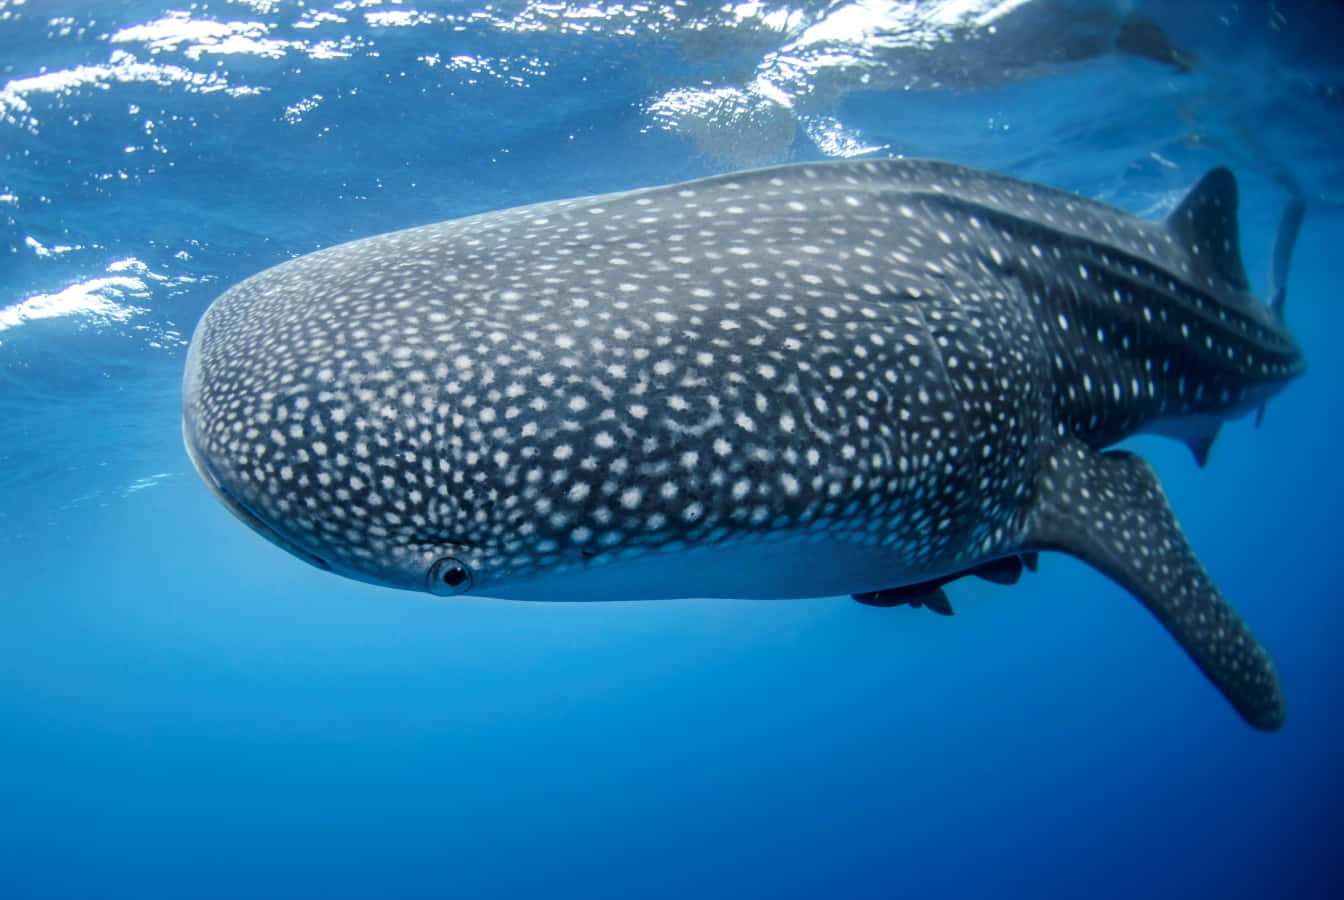 "Beneath the Surface: A Whale Shark Gliding Through Open Waters"